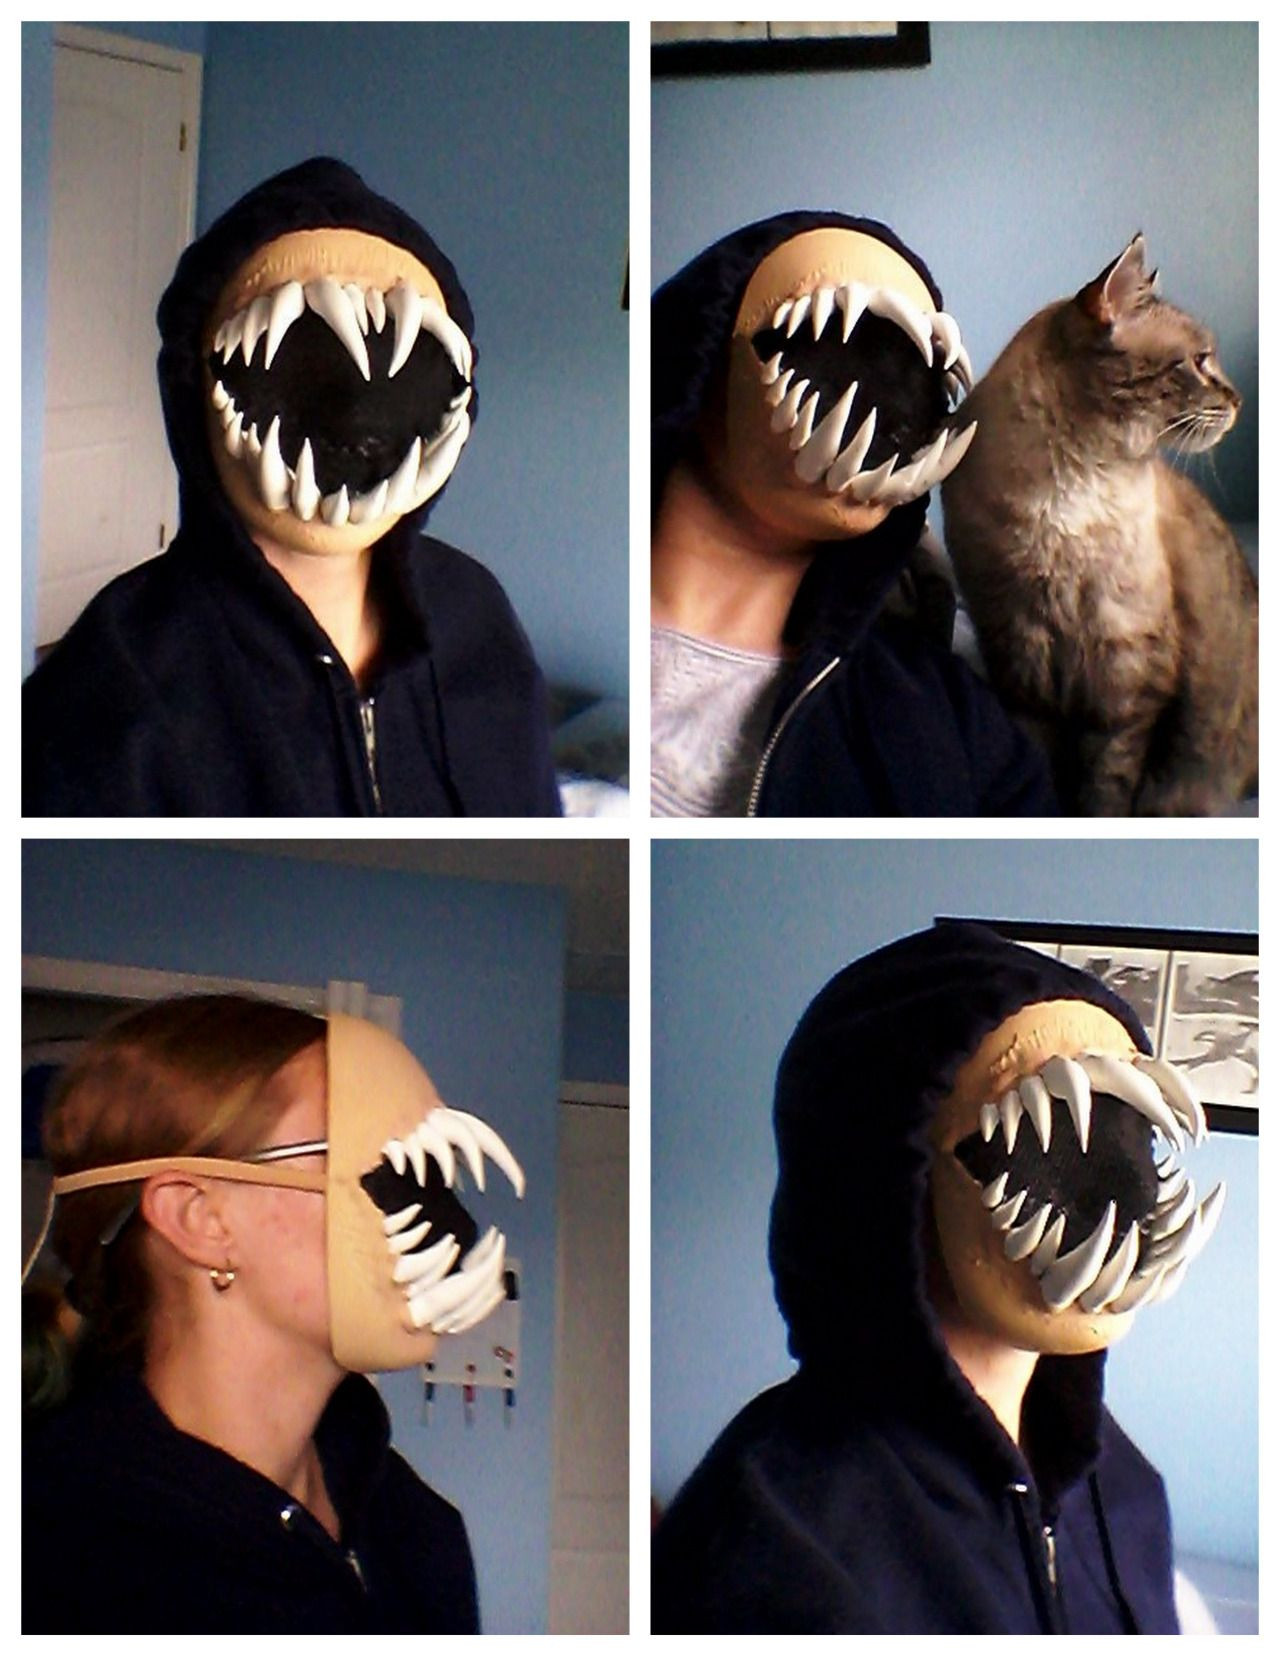 Scary Halloween Costumes DIY
 DIY Monster Teeth Mask from Instructables’ User ErinM18